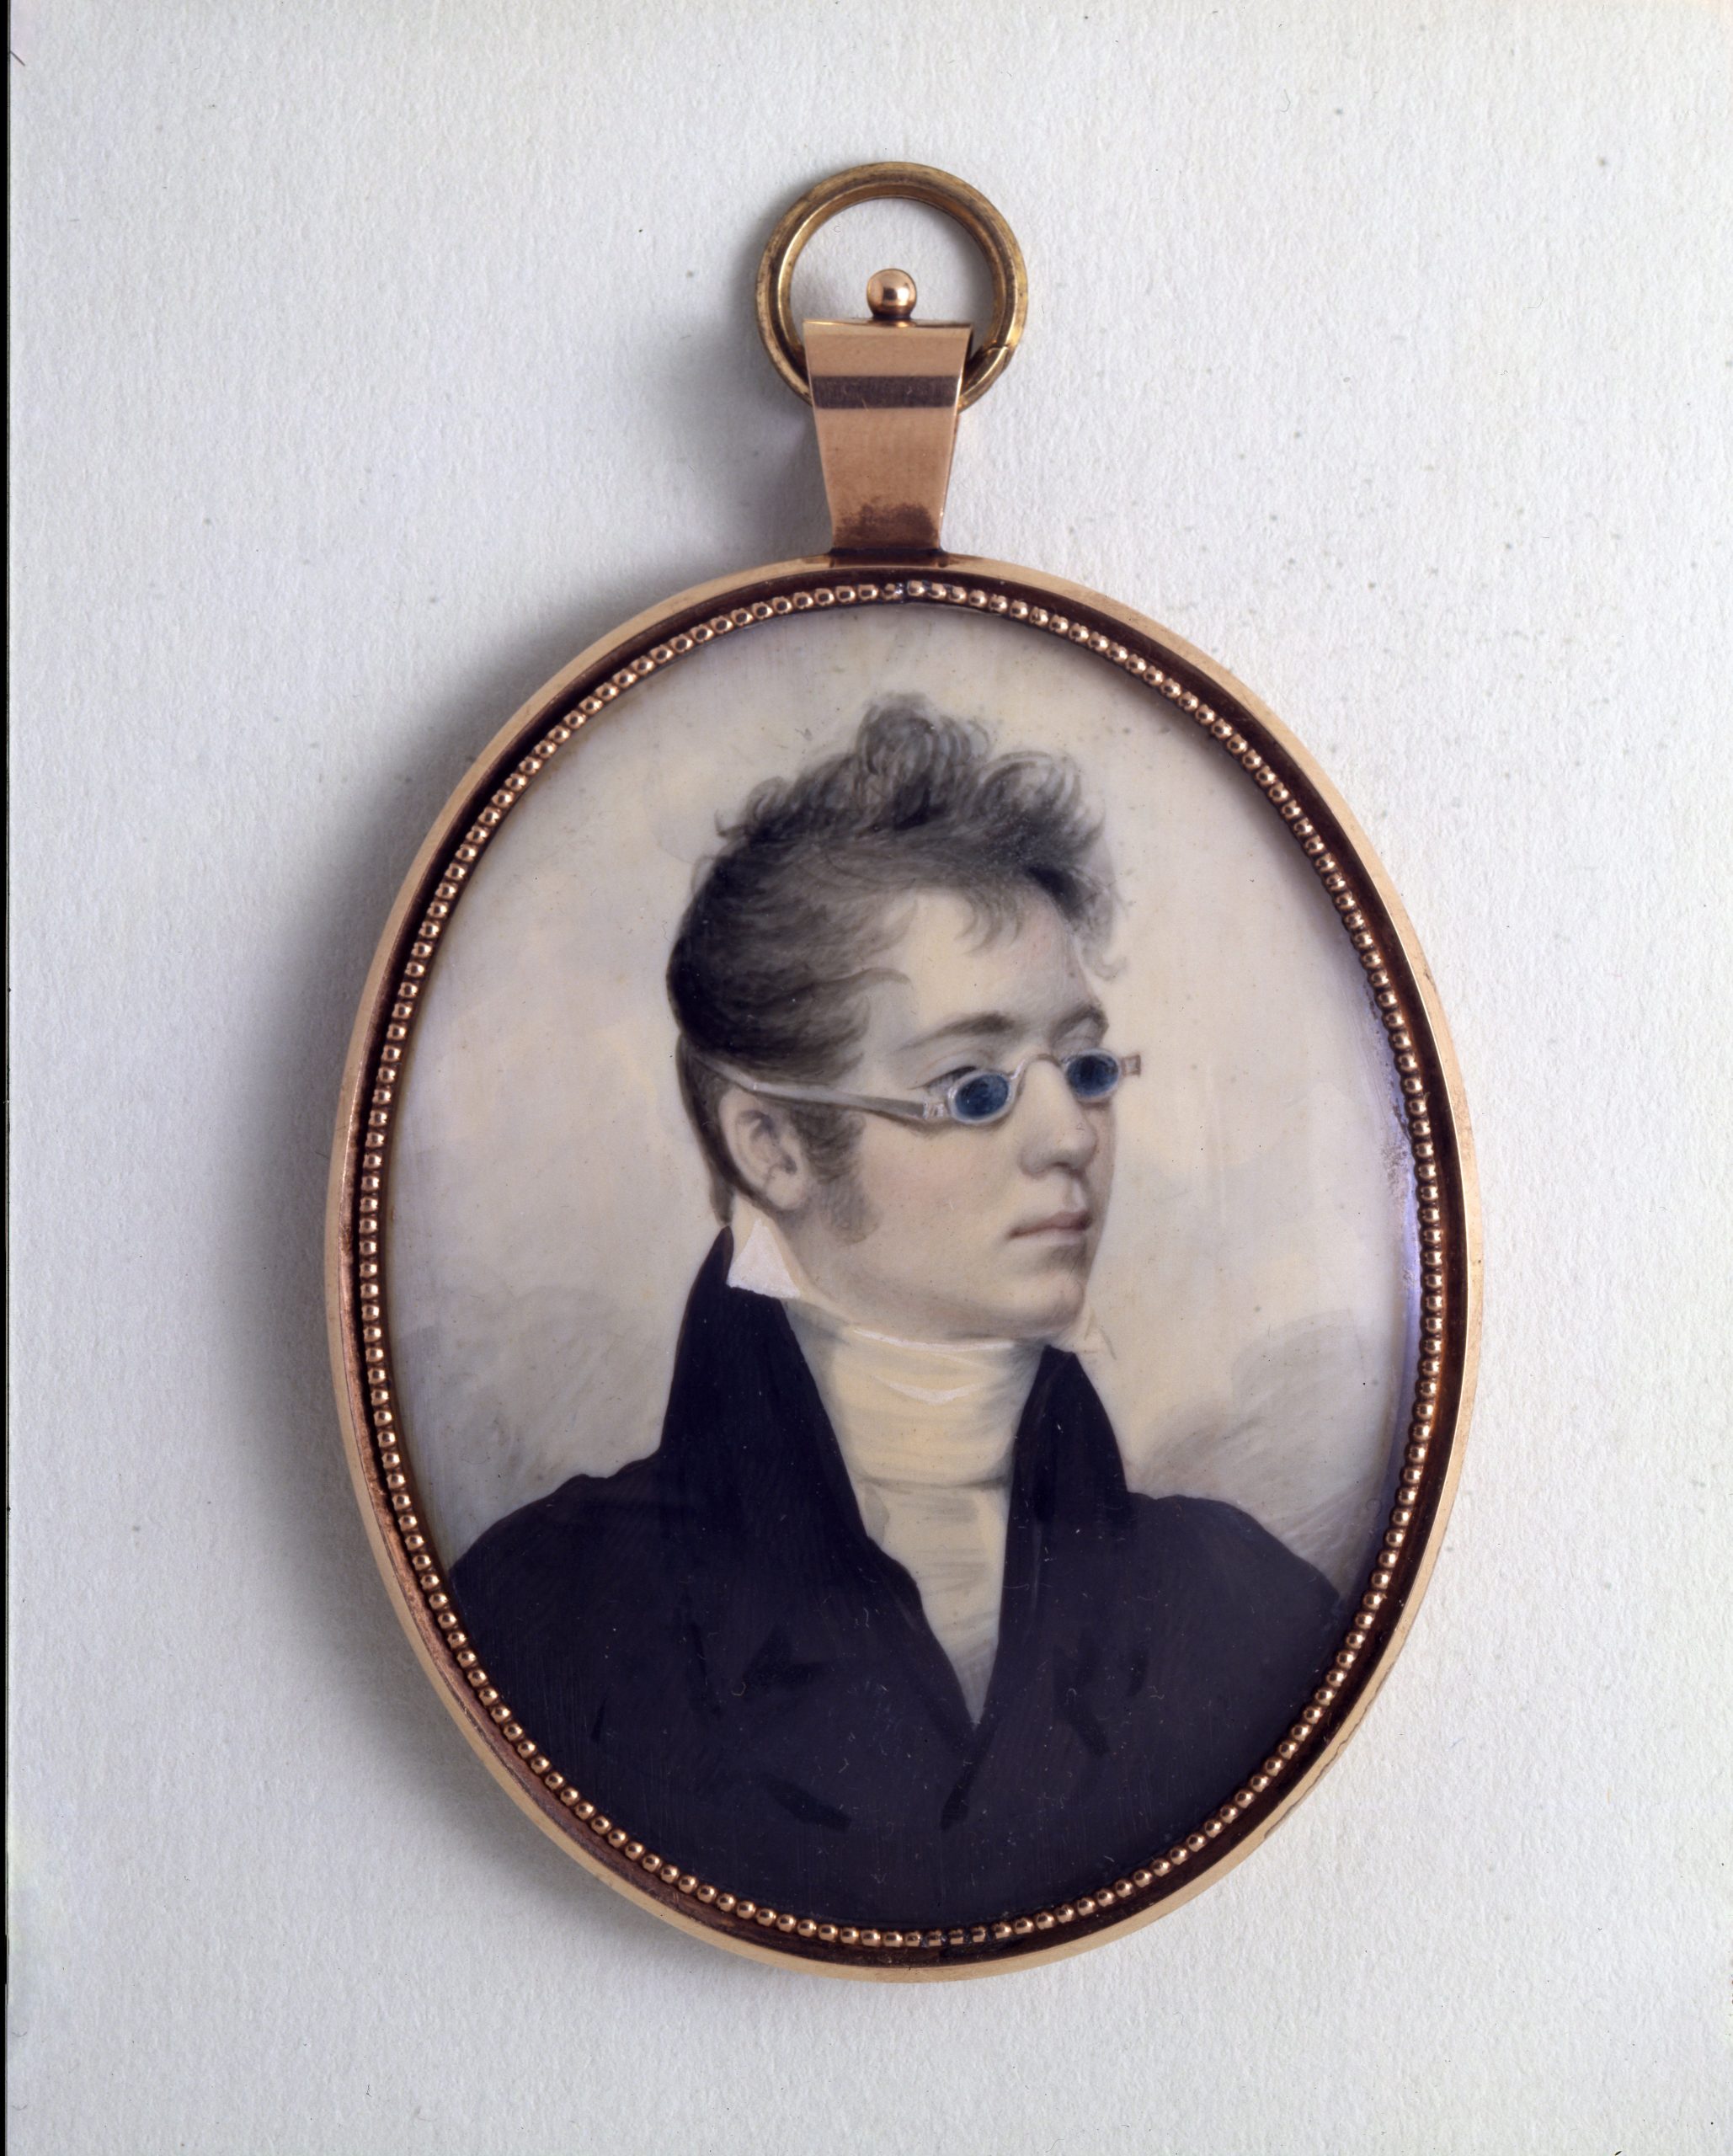 Portrait of a Gentleman, 1807, John Wesley Jarvis (1780-1840), 3 1/8 x 2 ½ inches, Courtesy of Richard and Ginger Dietrich